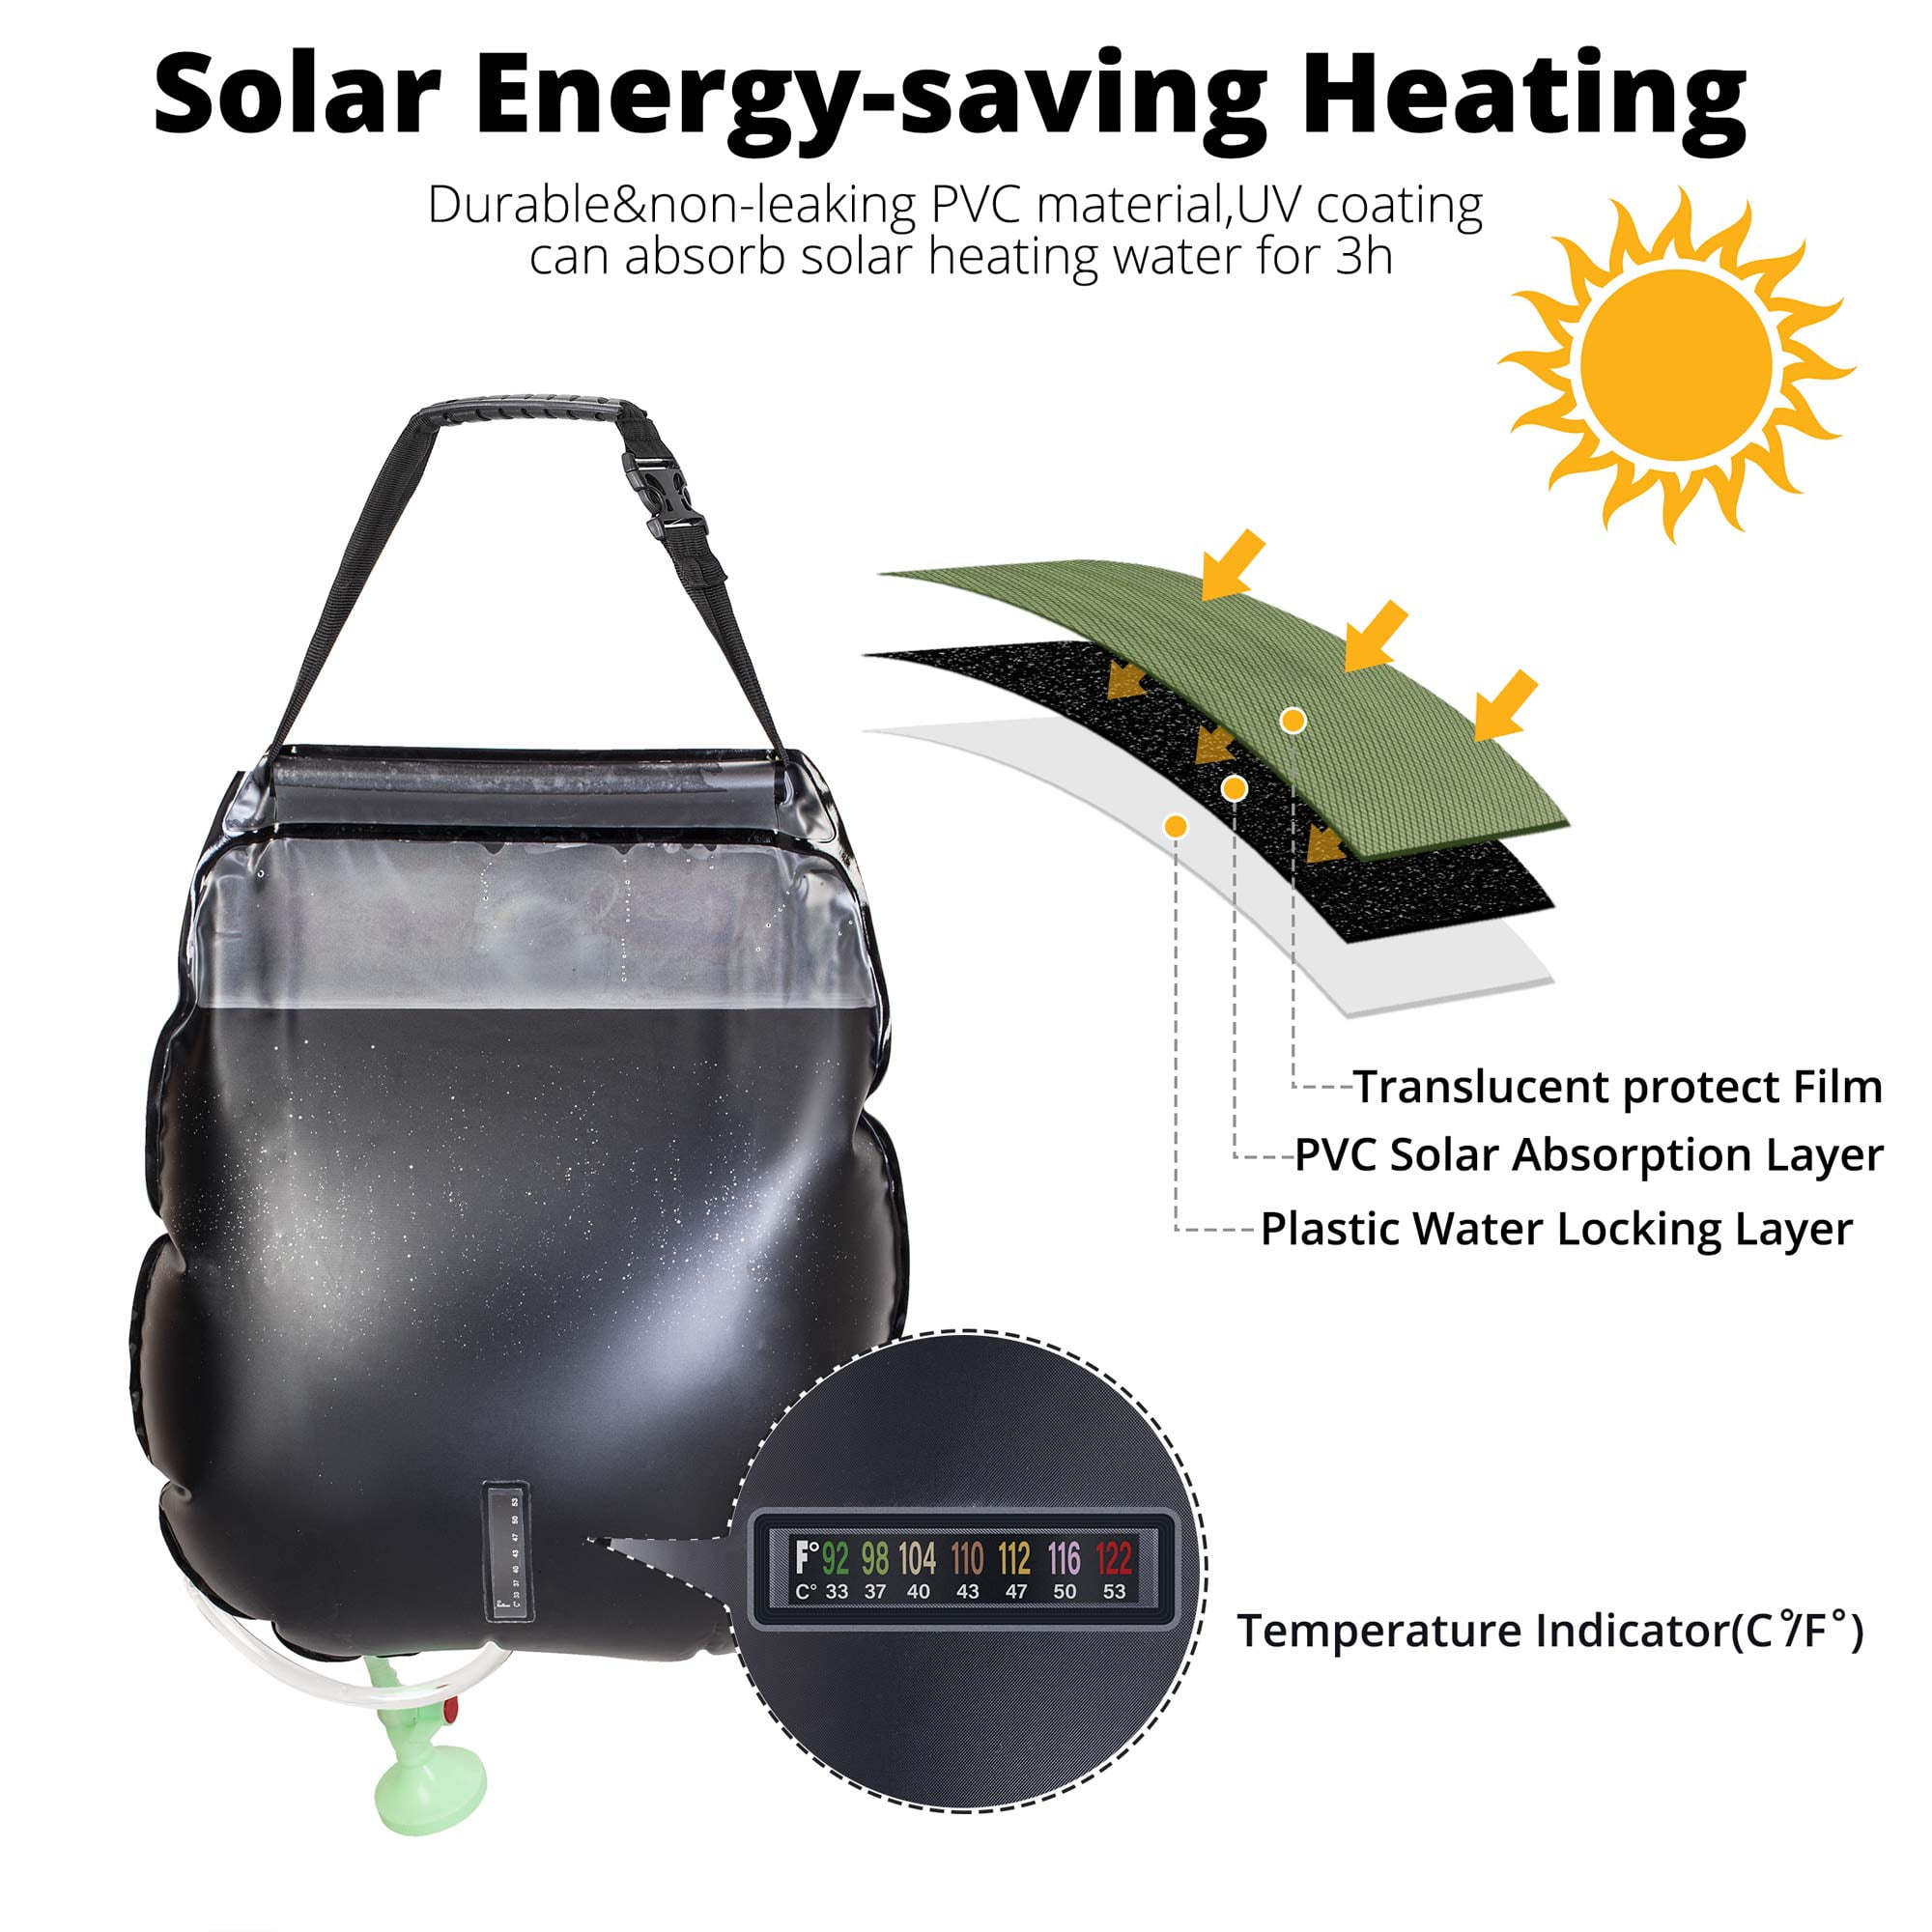 WEIYII Solar Shower Bag Portable Shower for Camping Heating Camping Shower Bag 5 Gallons/20L Hot Water 45°C Switchable Shower Head for Camping Beach Swimming Outdoor Traveling Hiking 